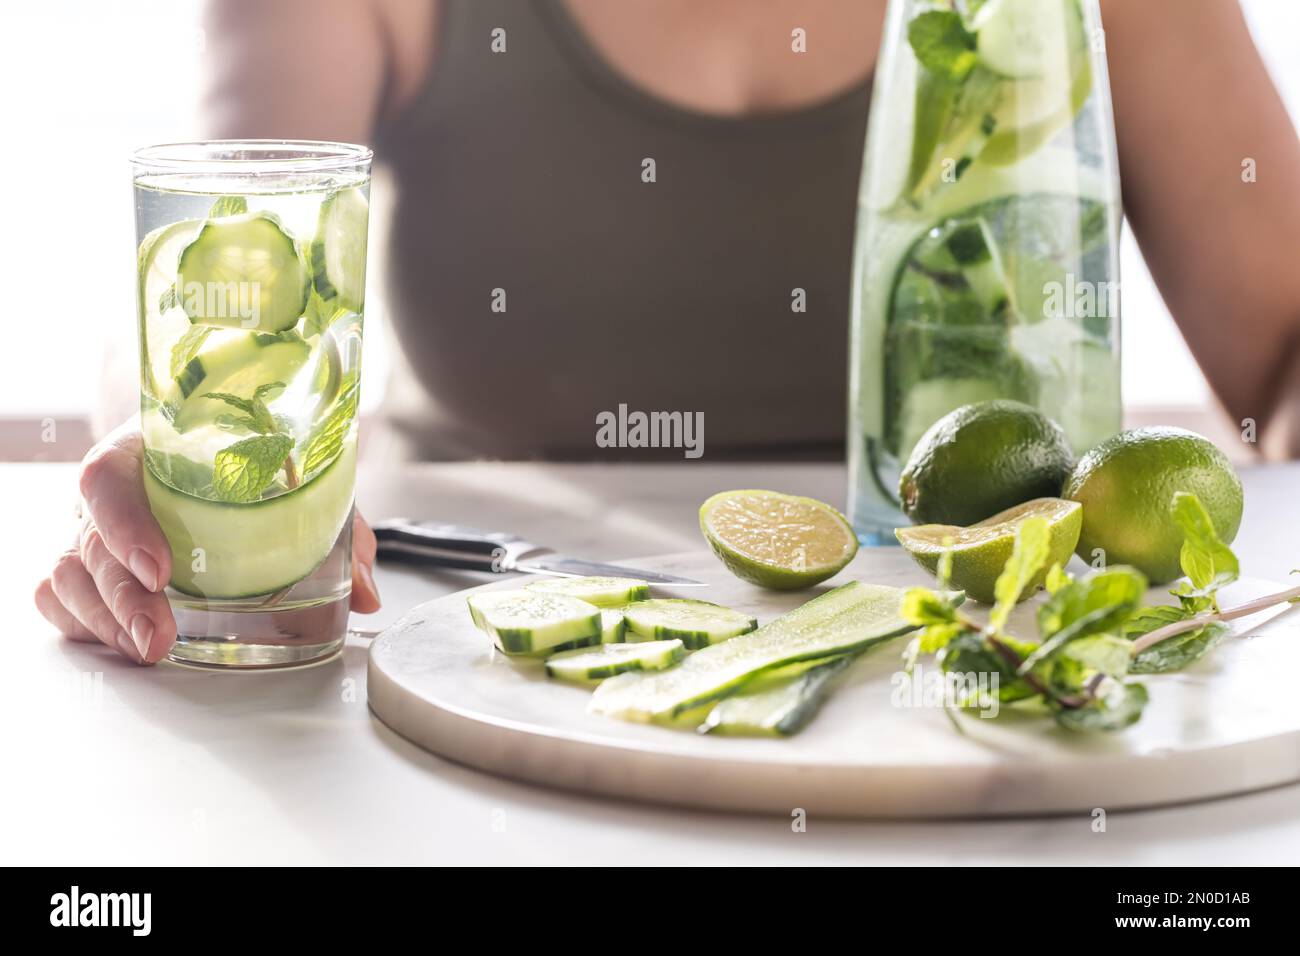 Woman holding a tall glass of infused cucumber water with lime and mint mixed in Stock Photo